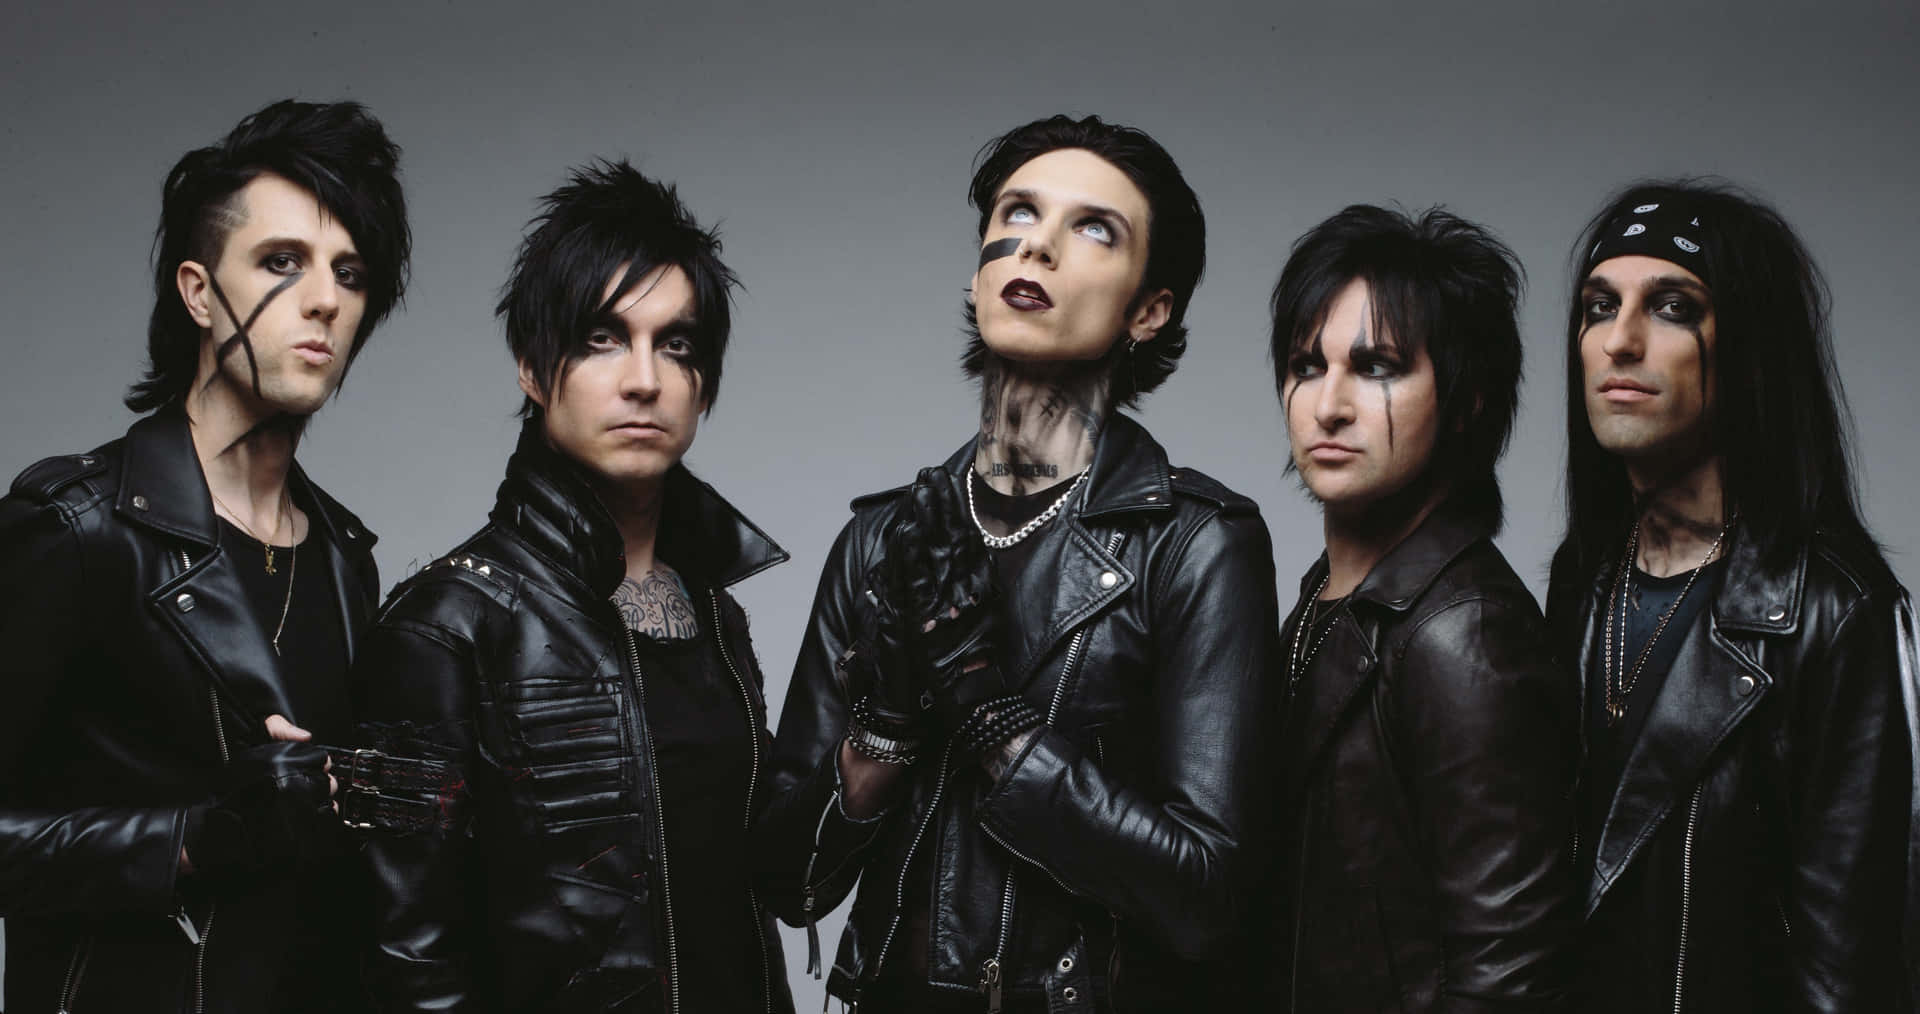 Get Ready to Rock Out with Black Veil Brides Wallpaper